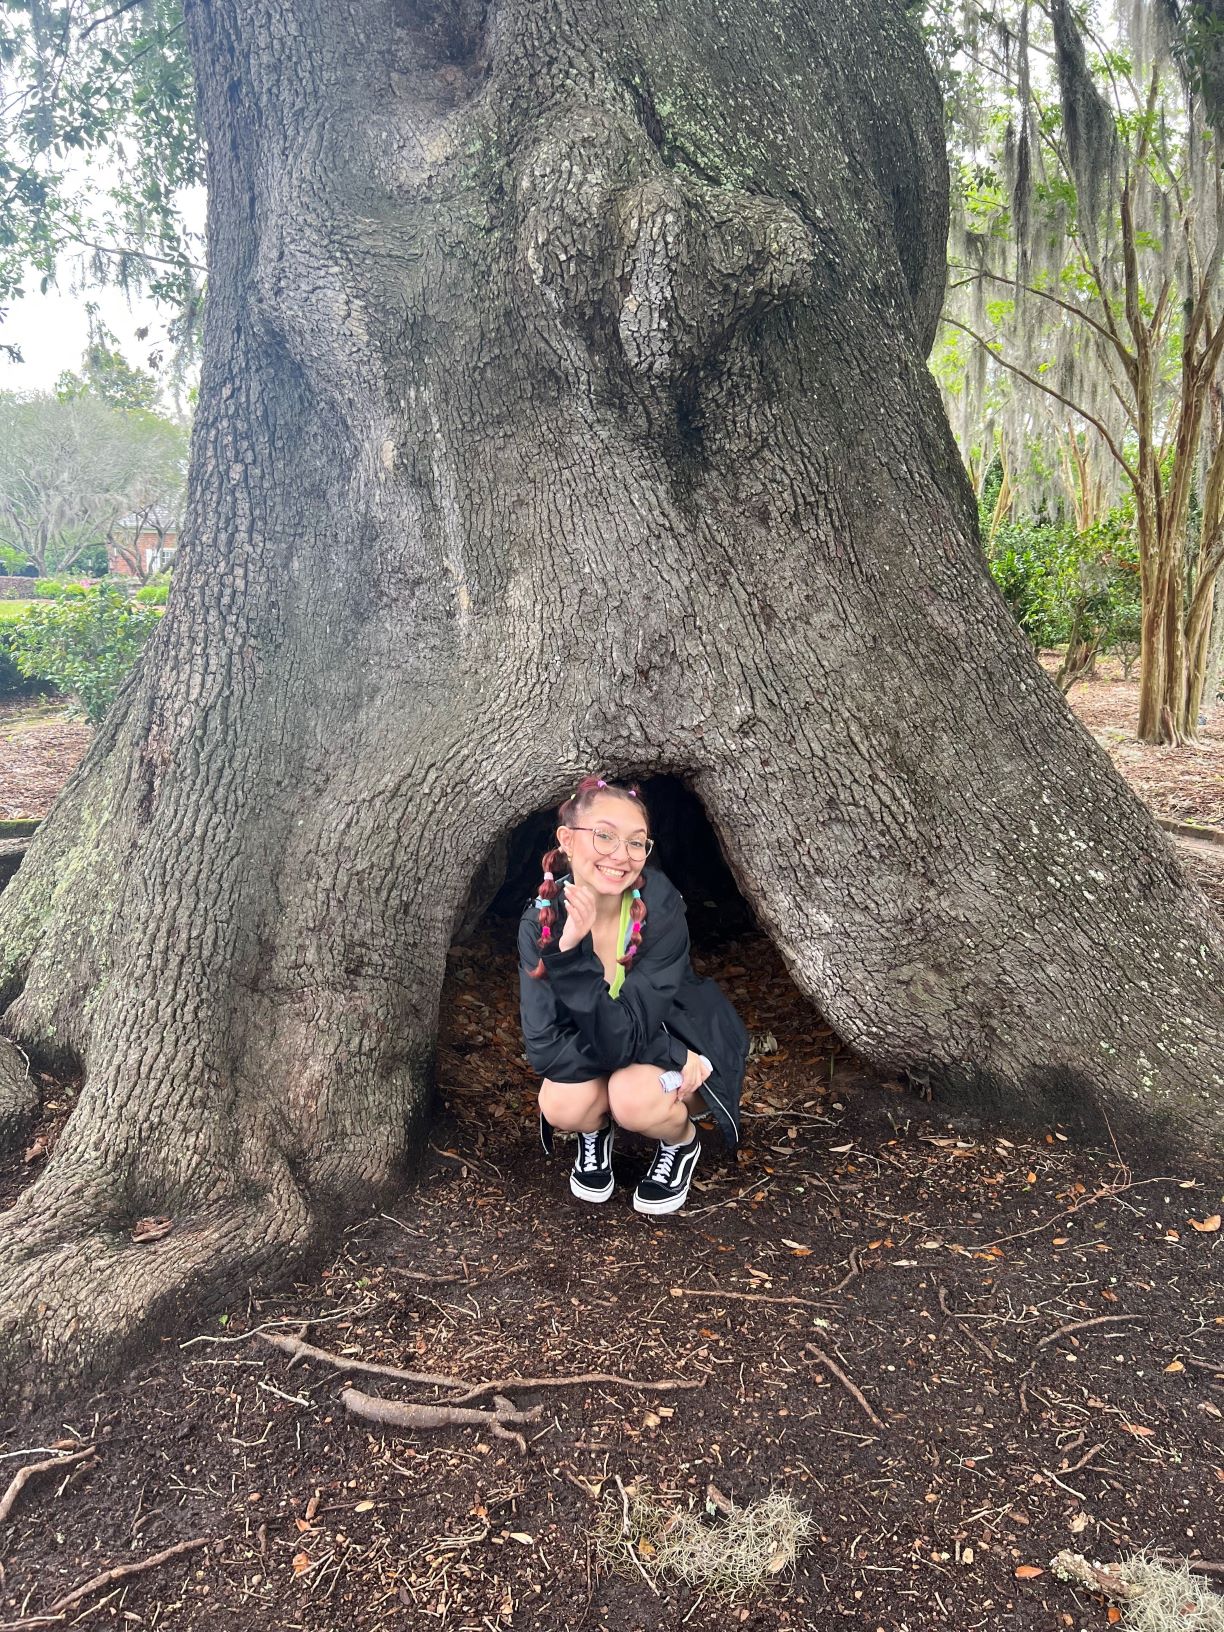 Student crouched in the roots of an old tree